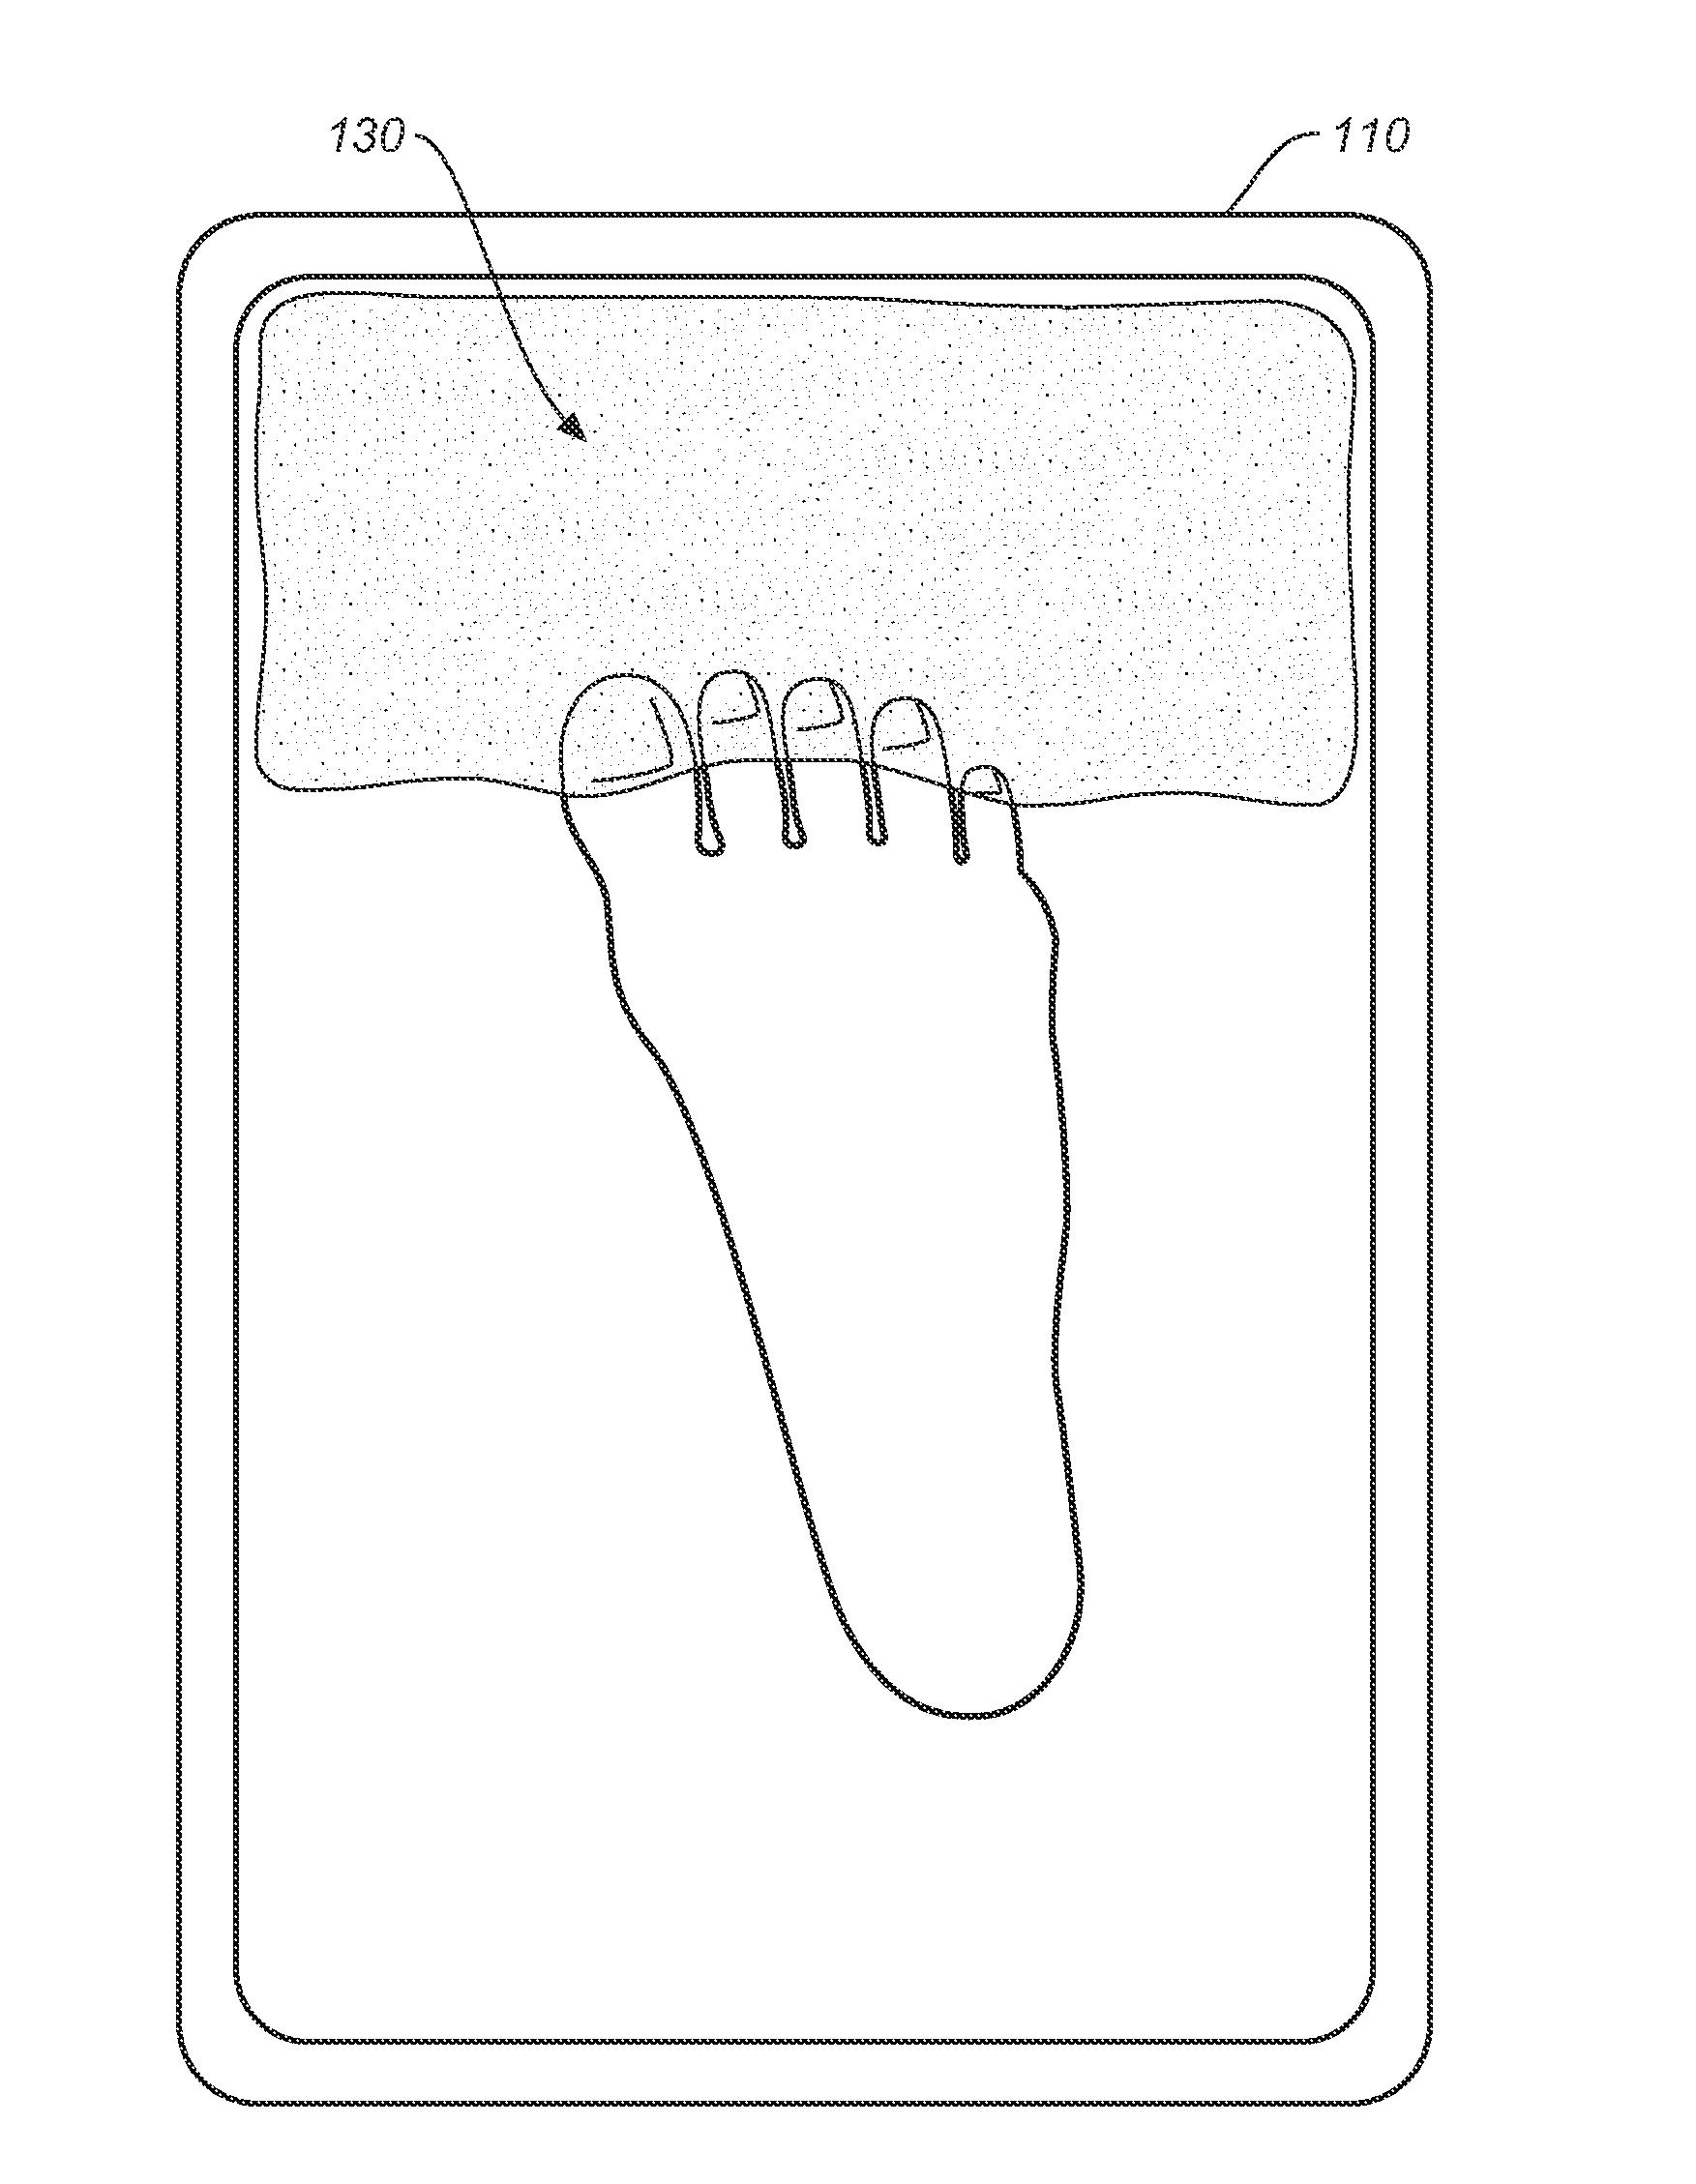 Method and apparatus for improving the appearance of nails affected by onychomycosis through the topical application of an aqueous solution containing boric acid and camphor or other terpenes